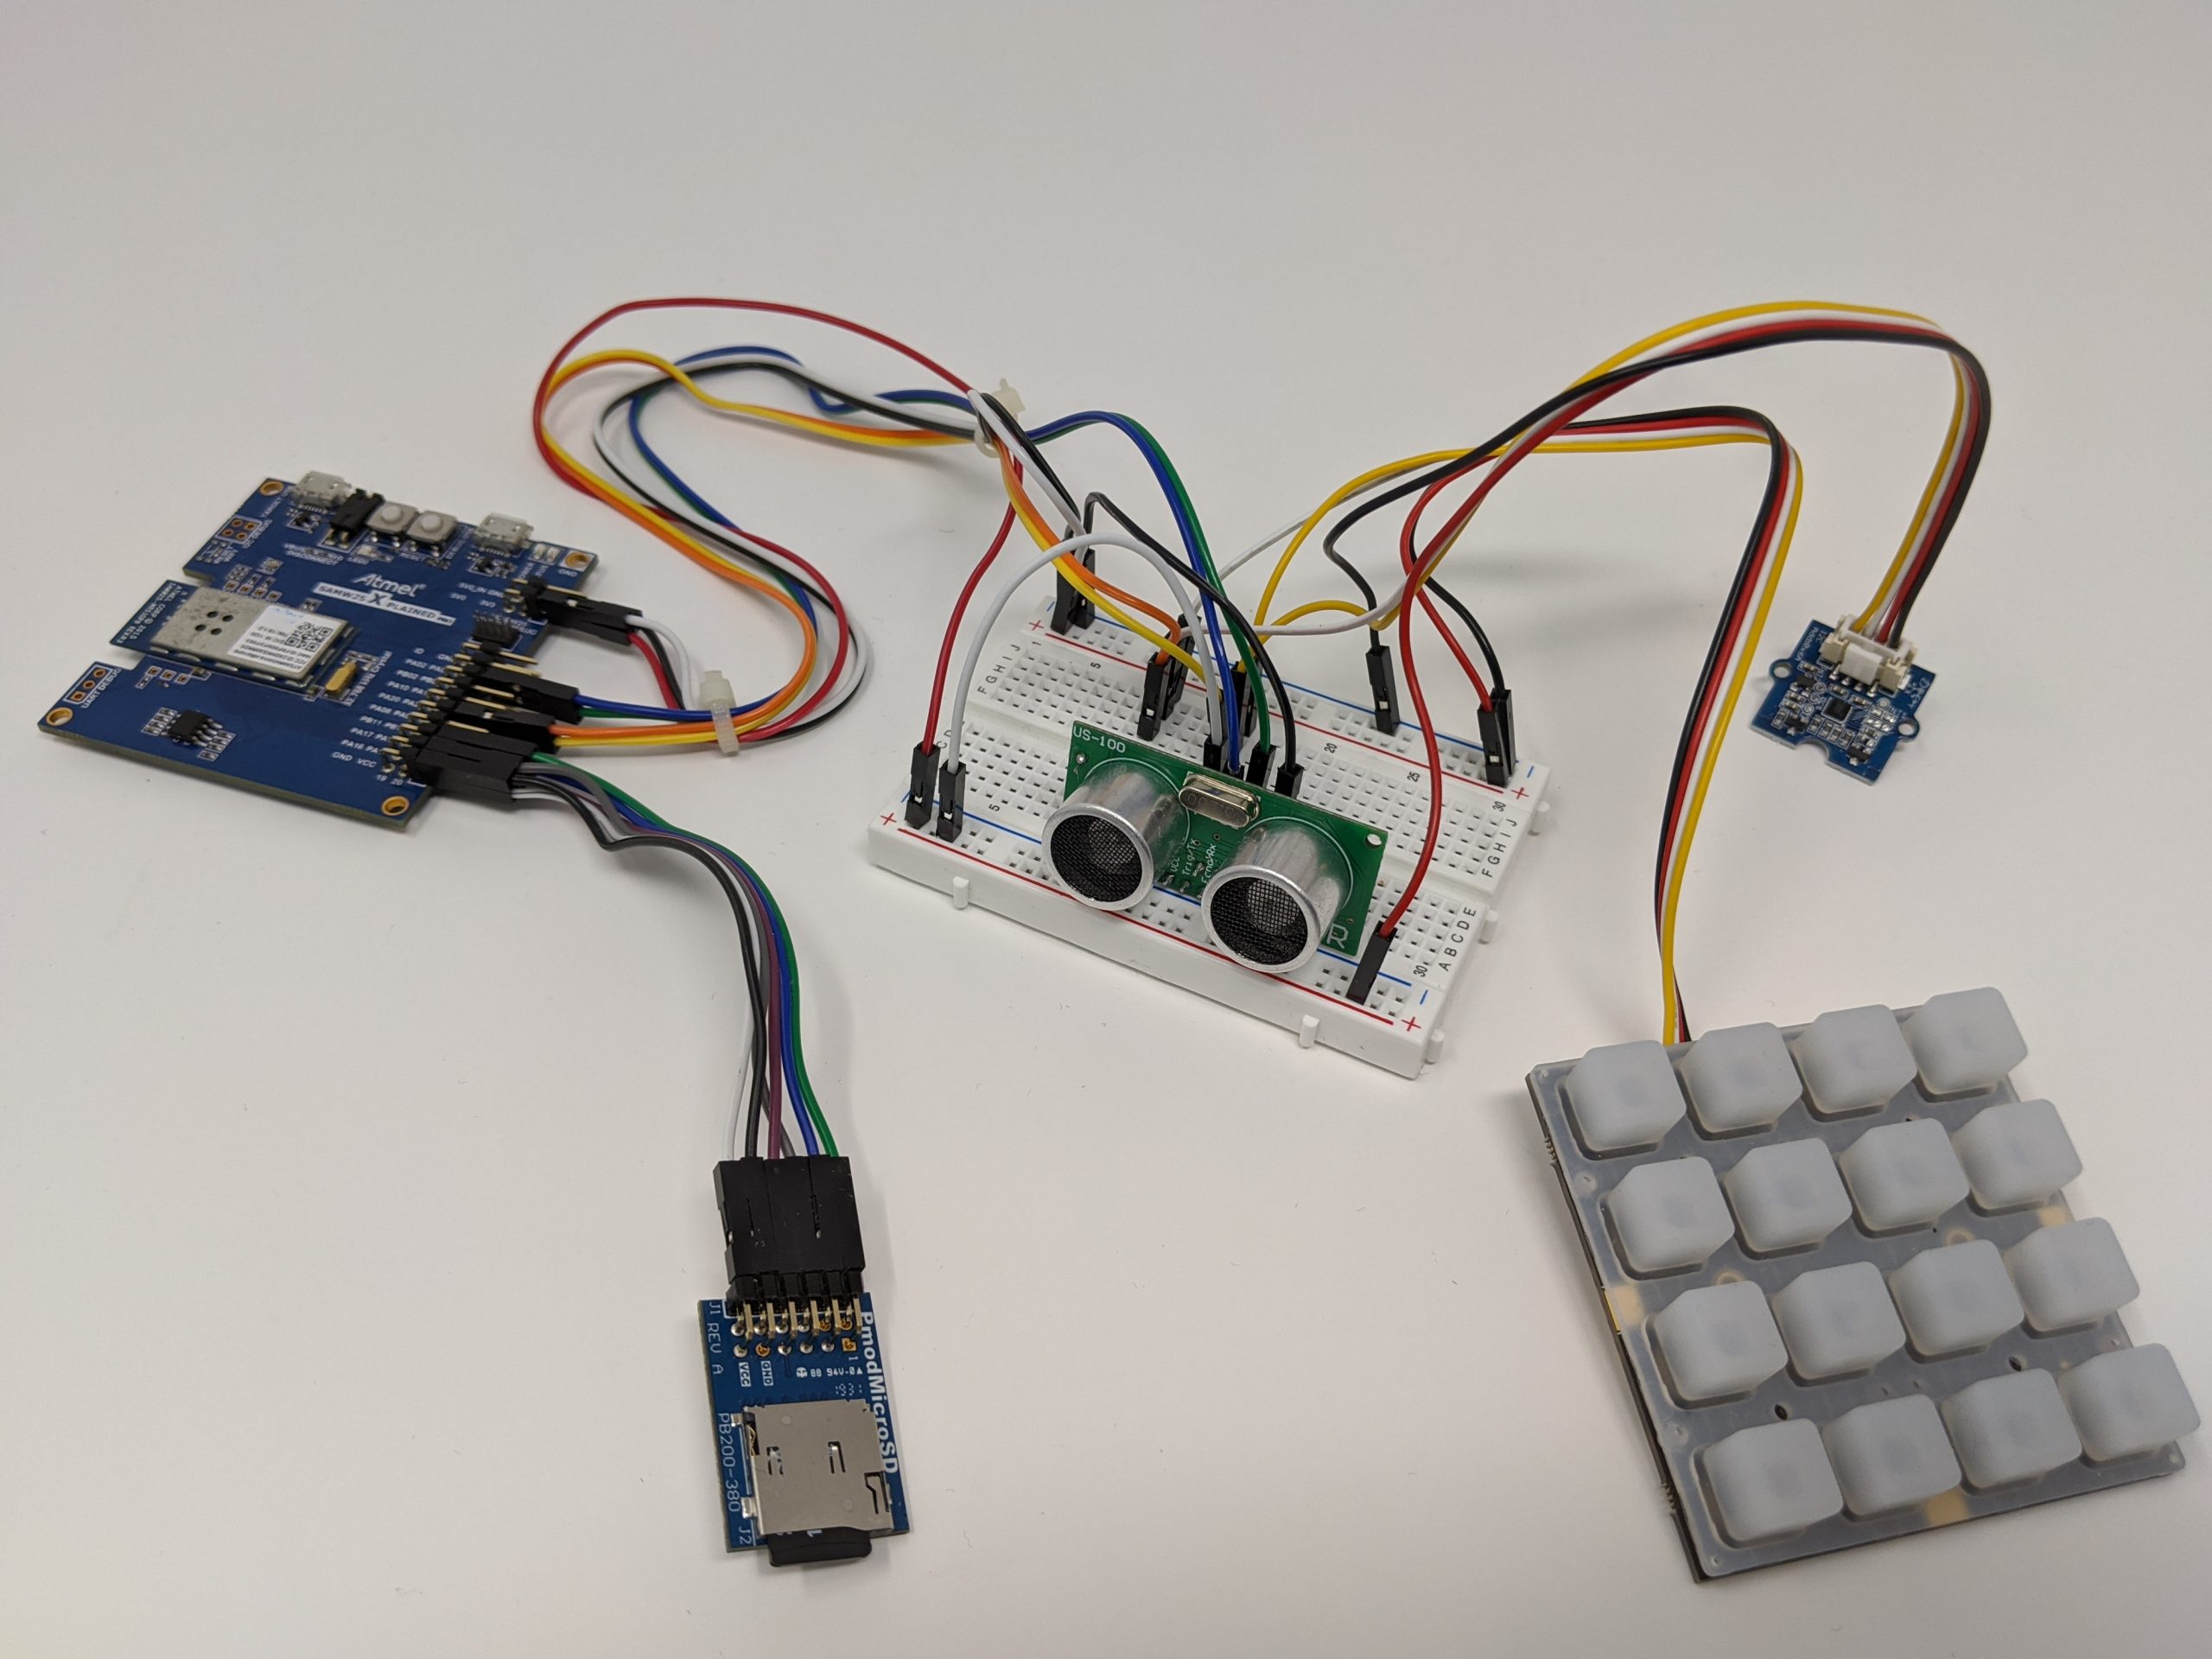 Electronic parts for an IoT game